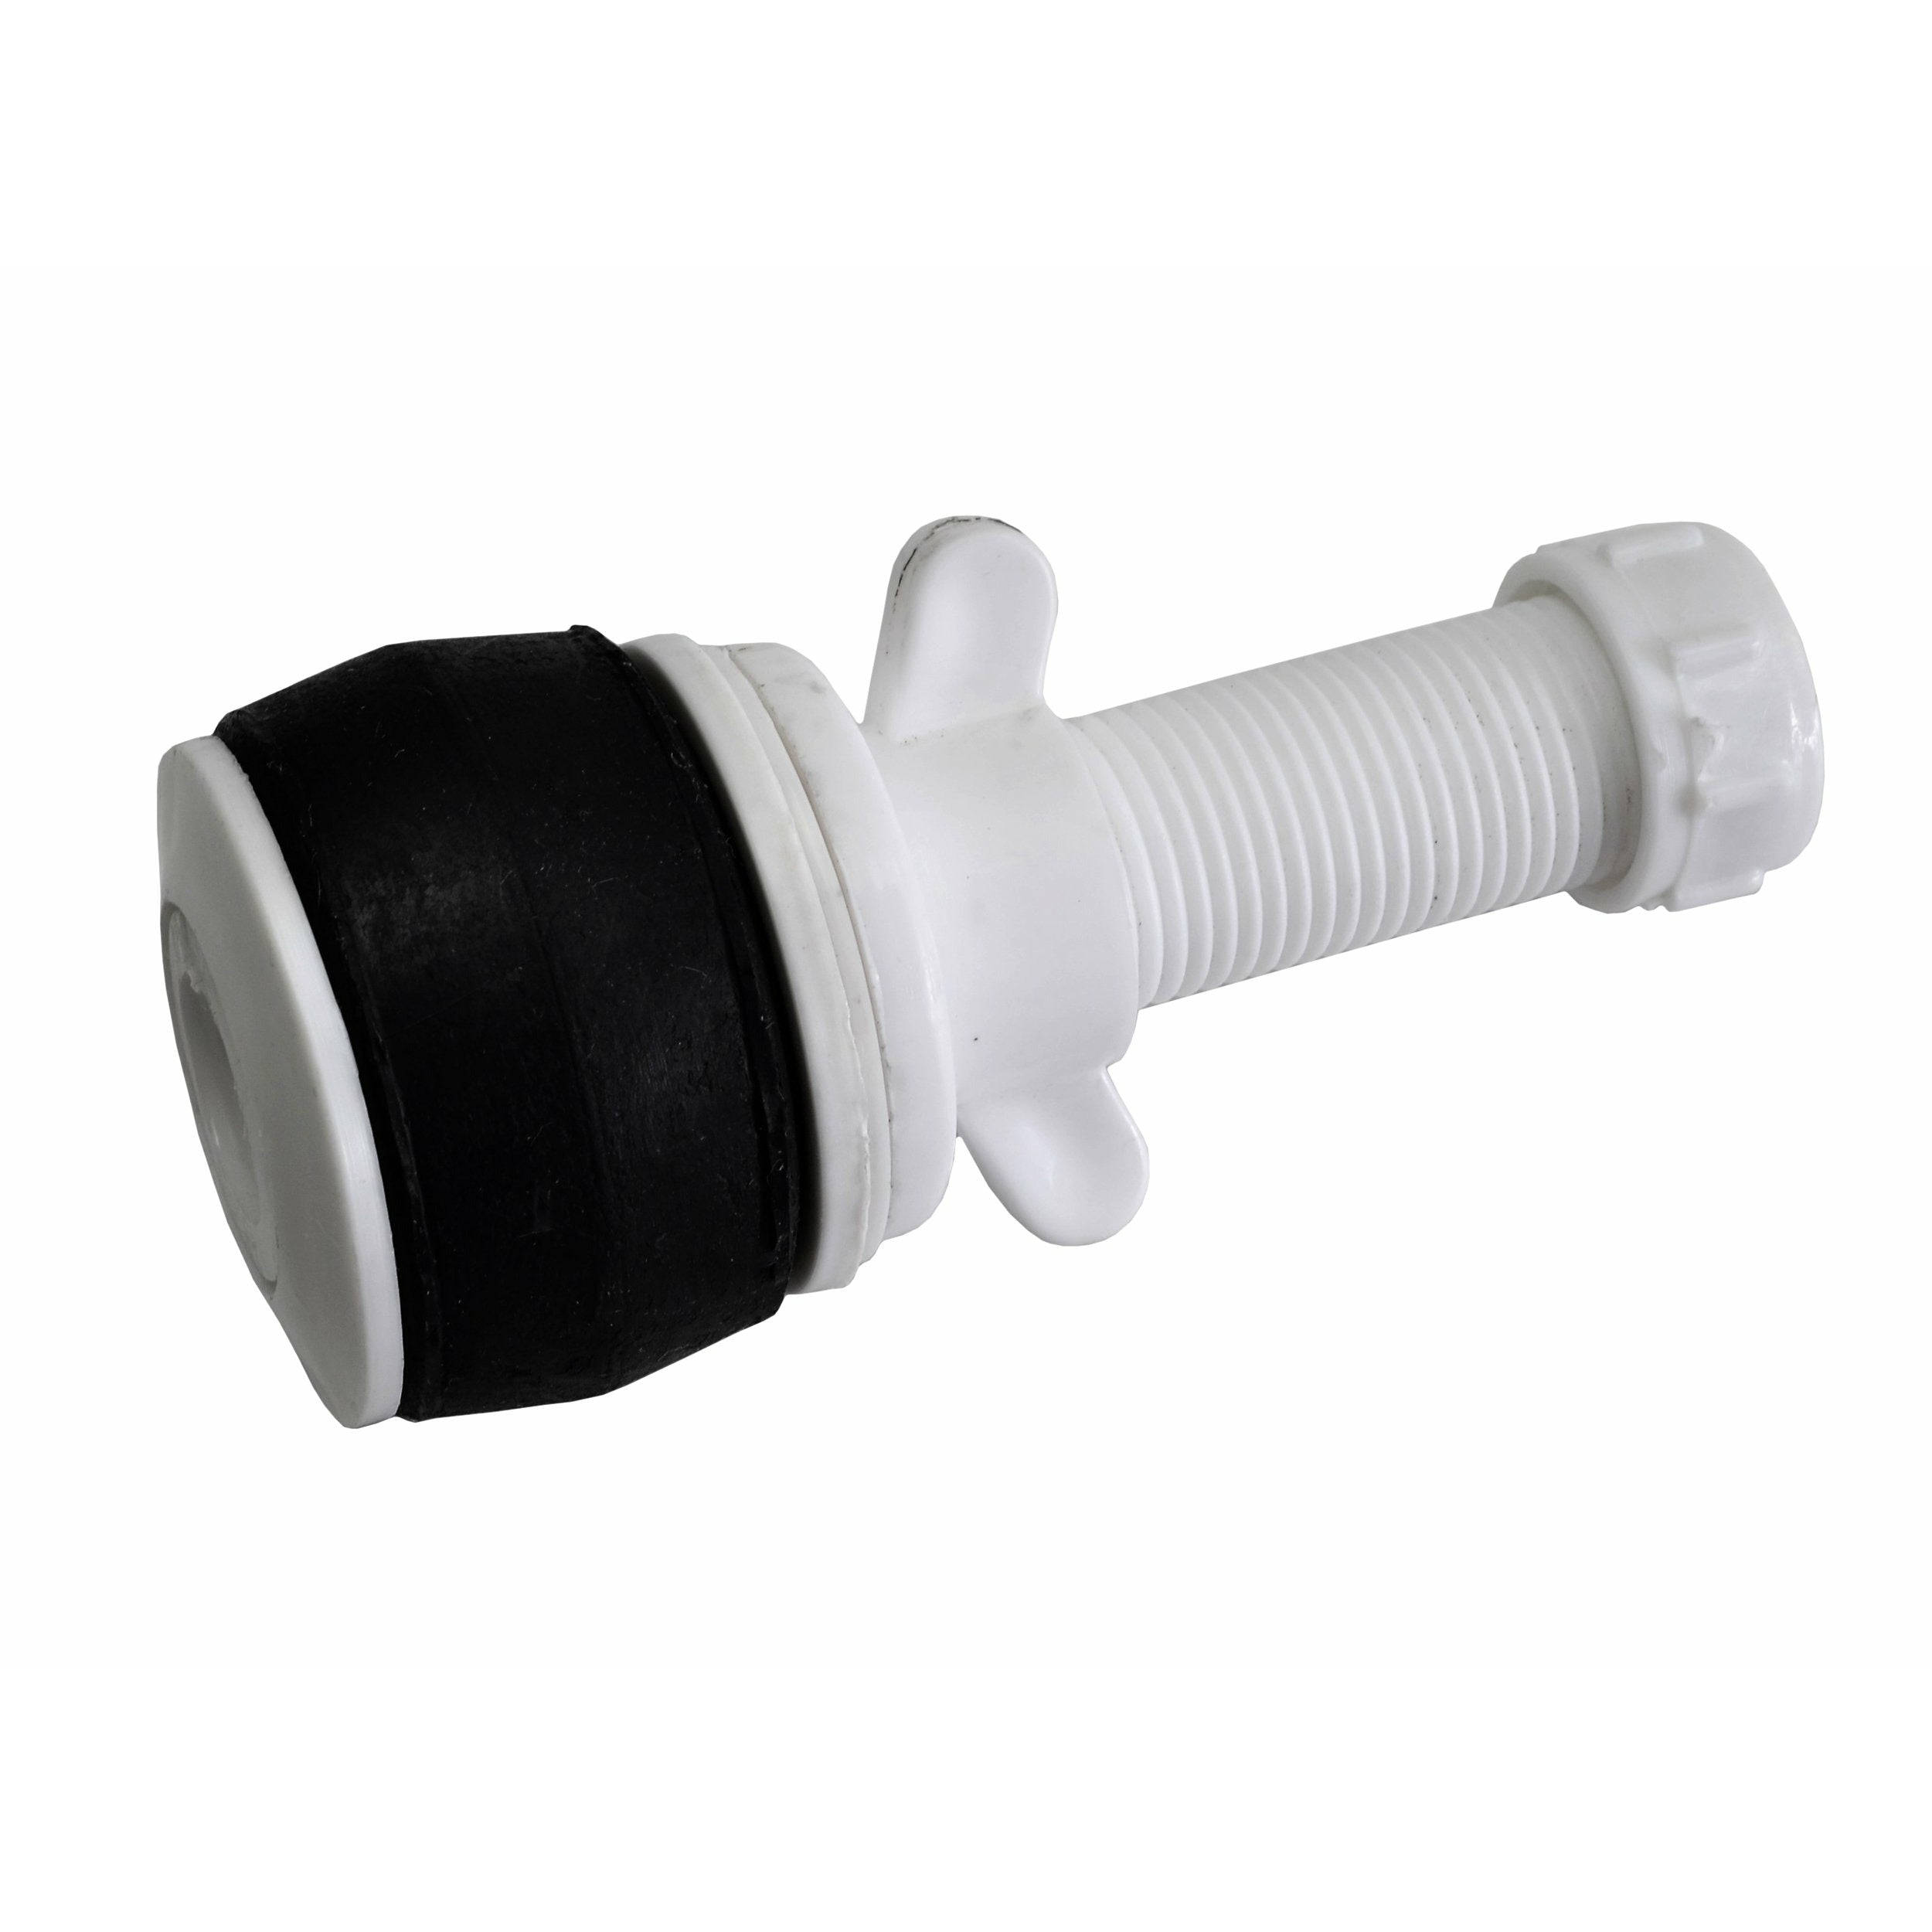 Nylon Mechanical Pipe Test plug bung with 13mm bypass 49mm to 54mm